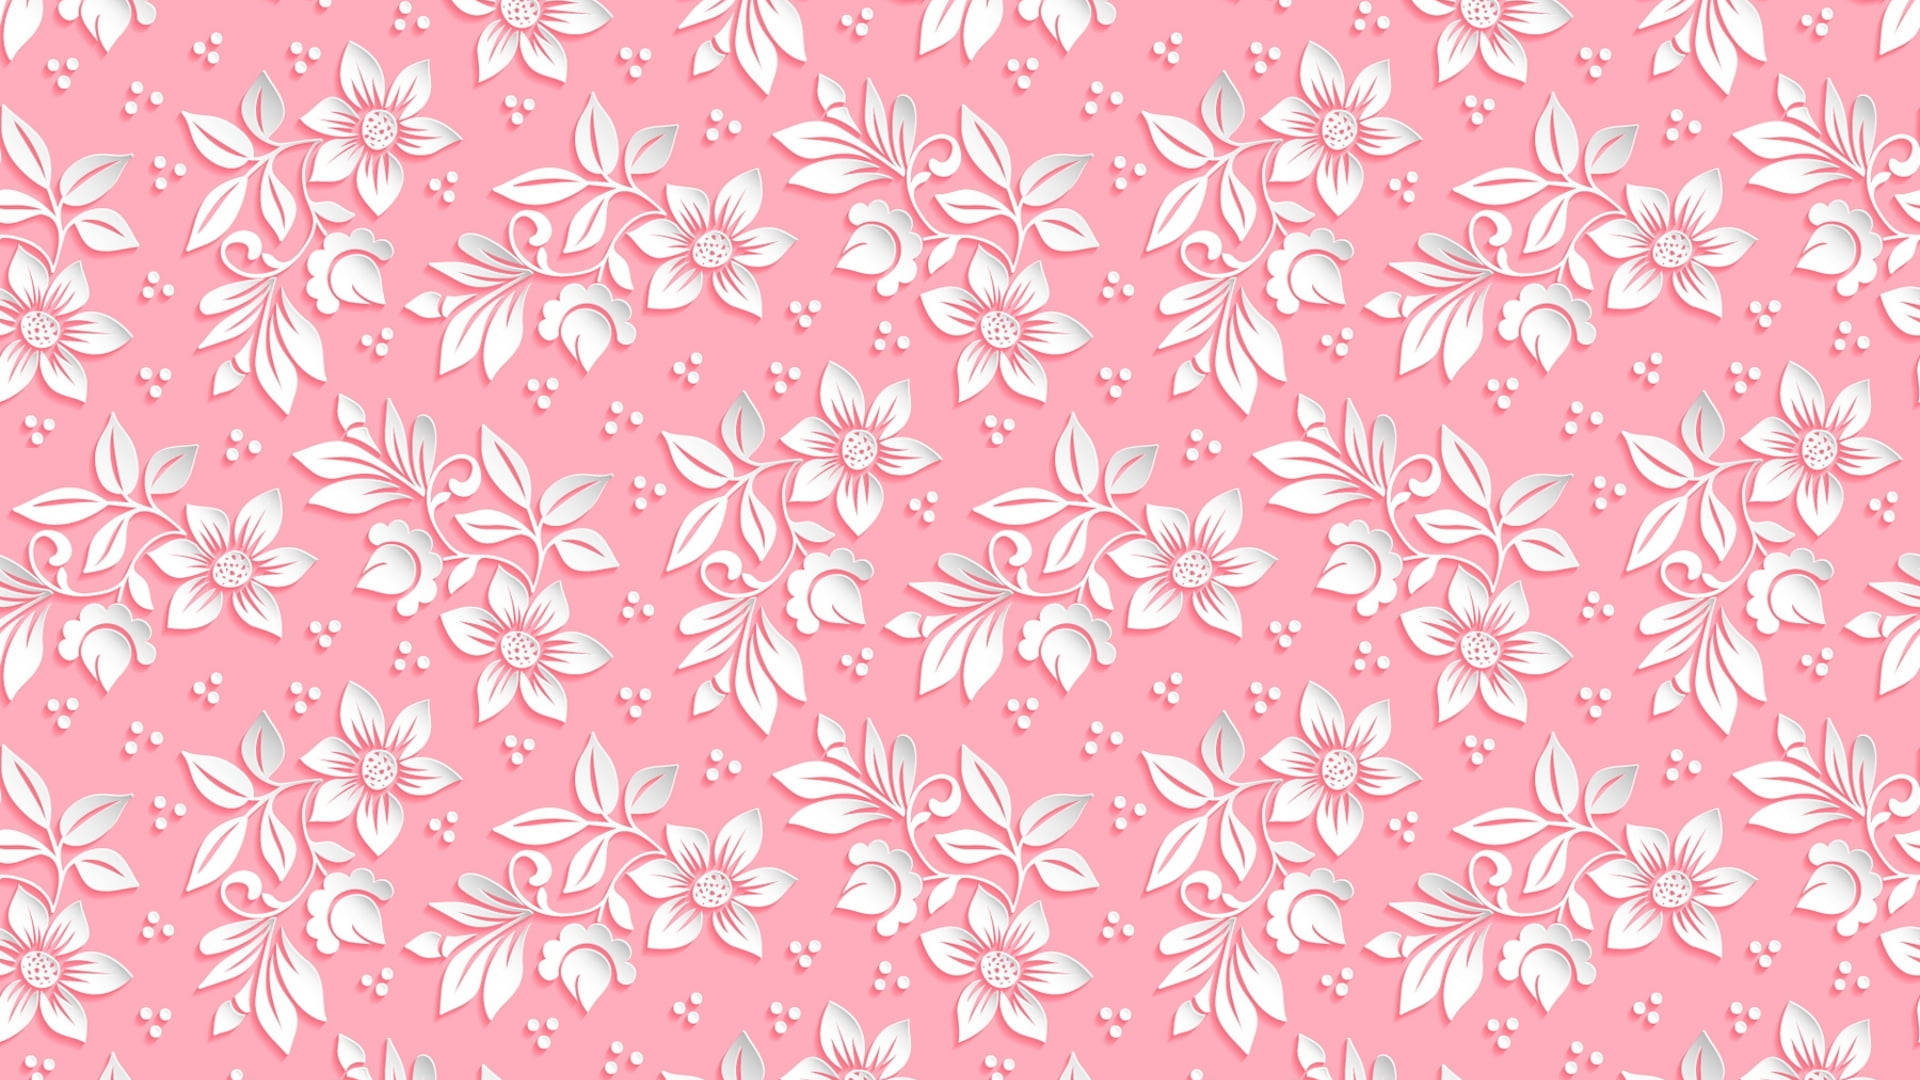 Pink And White Floral Patterns Wallpaper